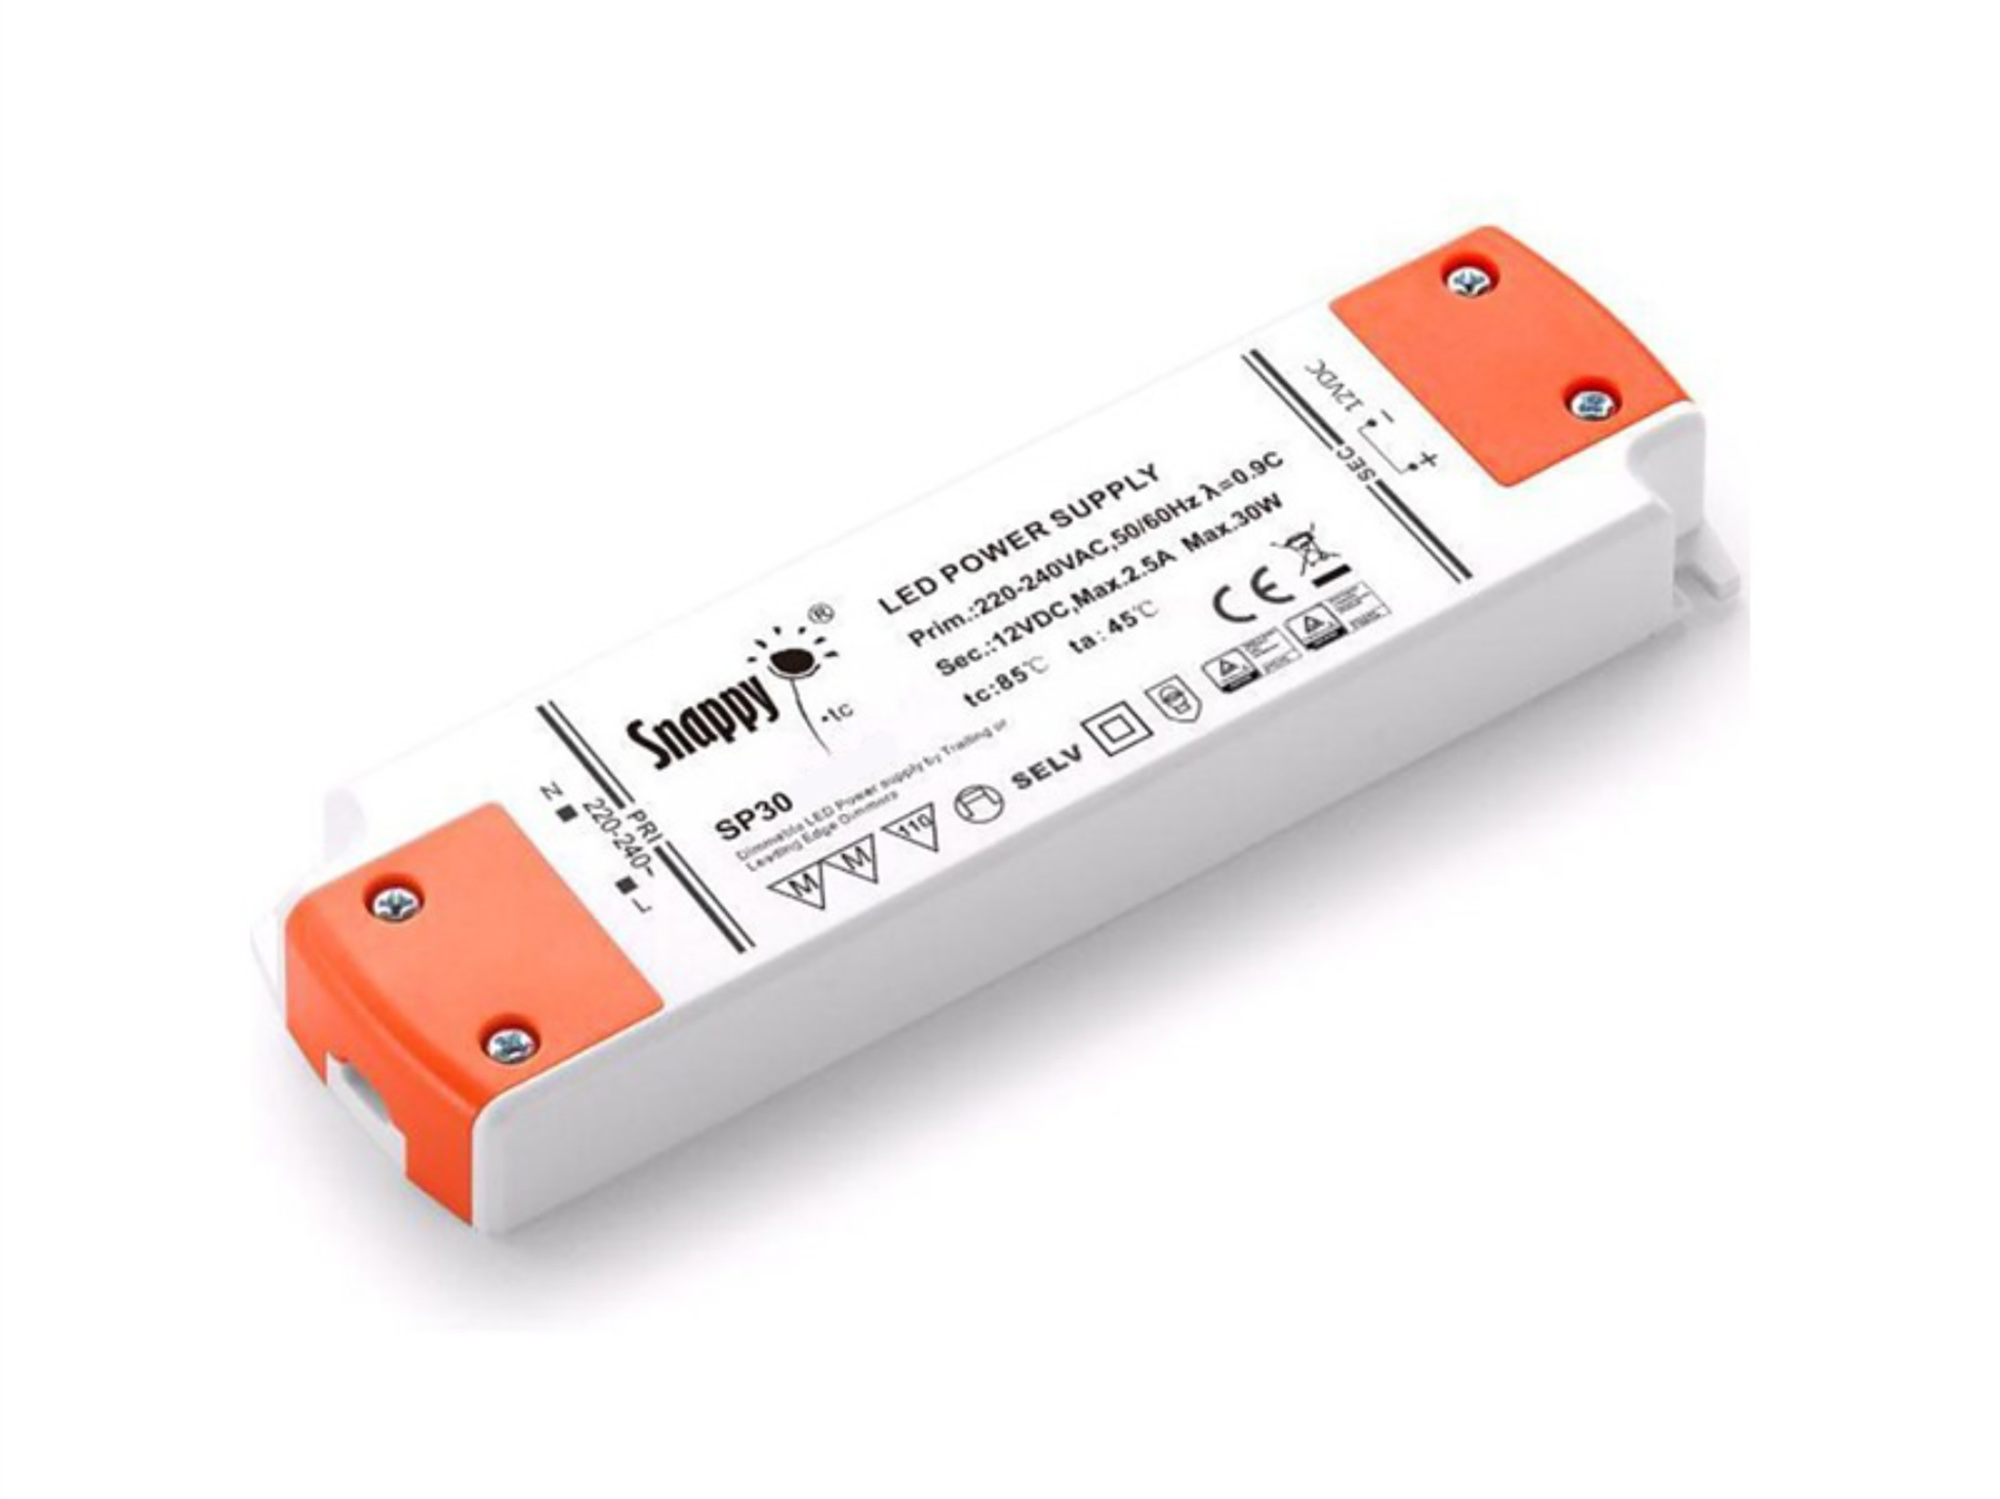 SP30-24VFT  SP, 30W, Constant Voltage Triac Dimmable PC LED Driver, 24VDC, 1.25A, Pf>0.9, TC:+85?, TA:45?, IP20, Effi >80%, Screw Connection, 3yrs Warranty.